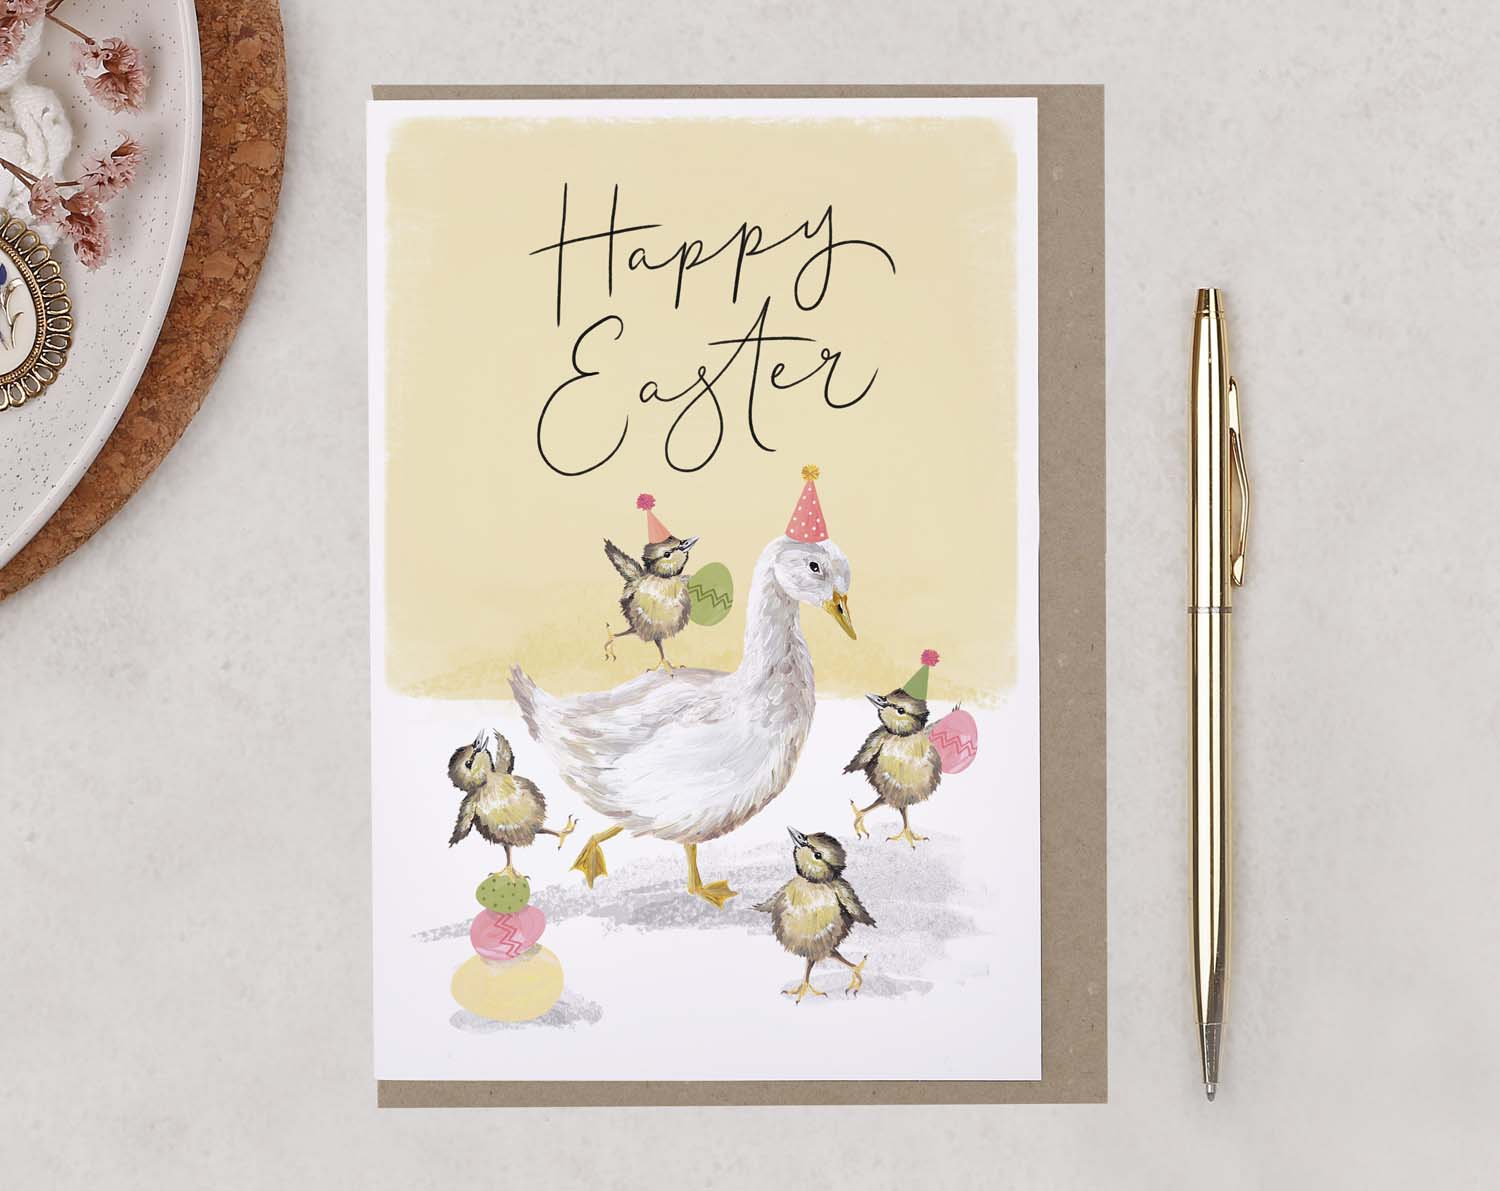 happy easter greeting card with duckling and goose